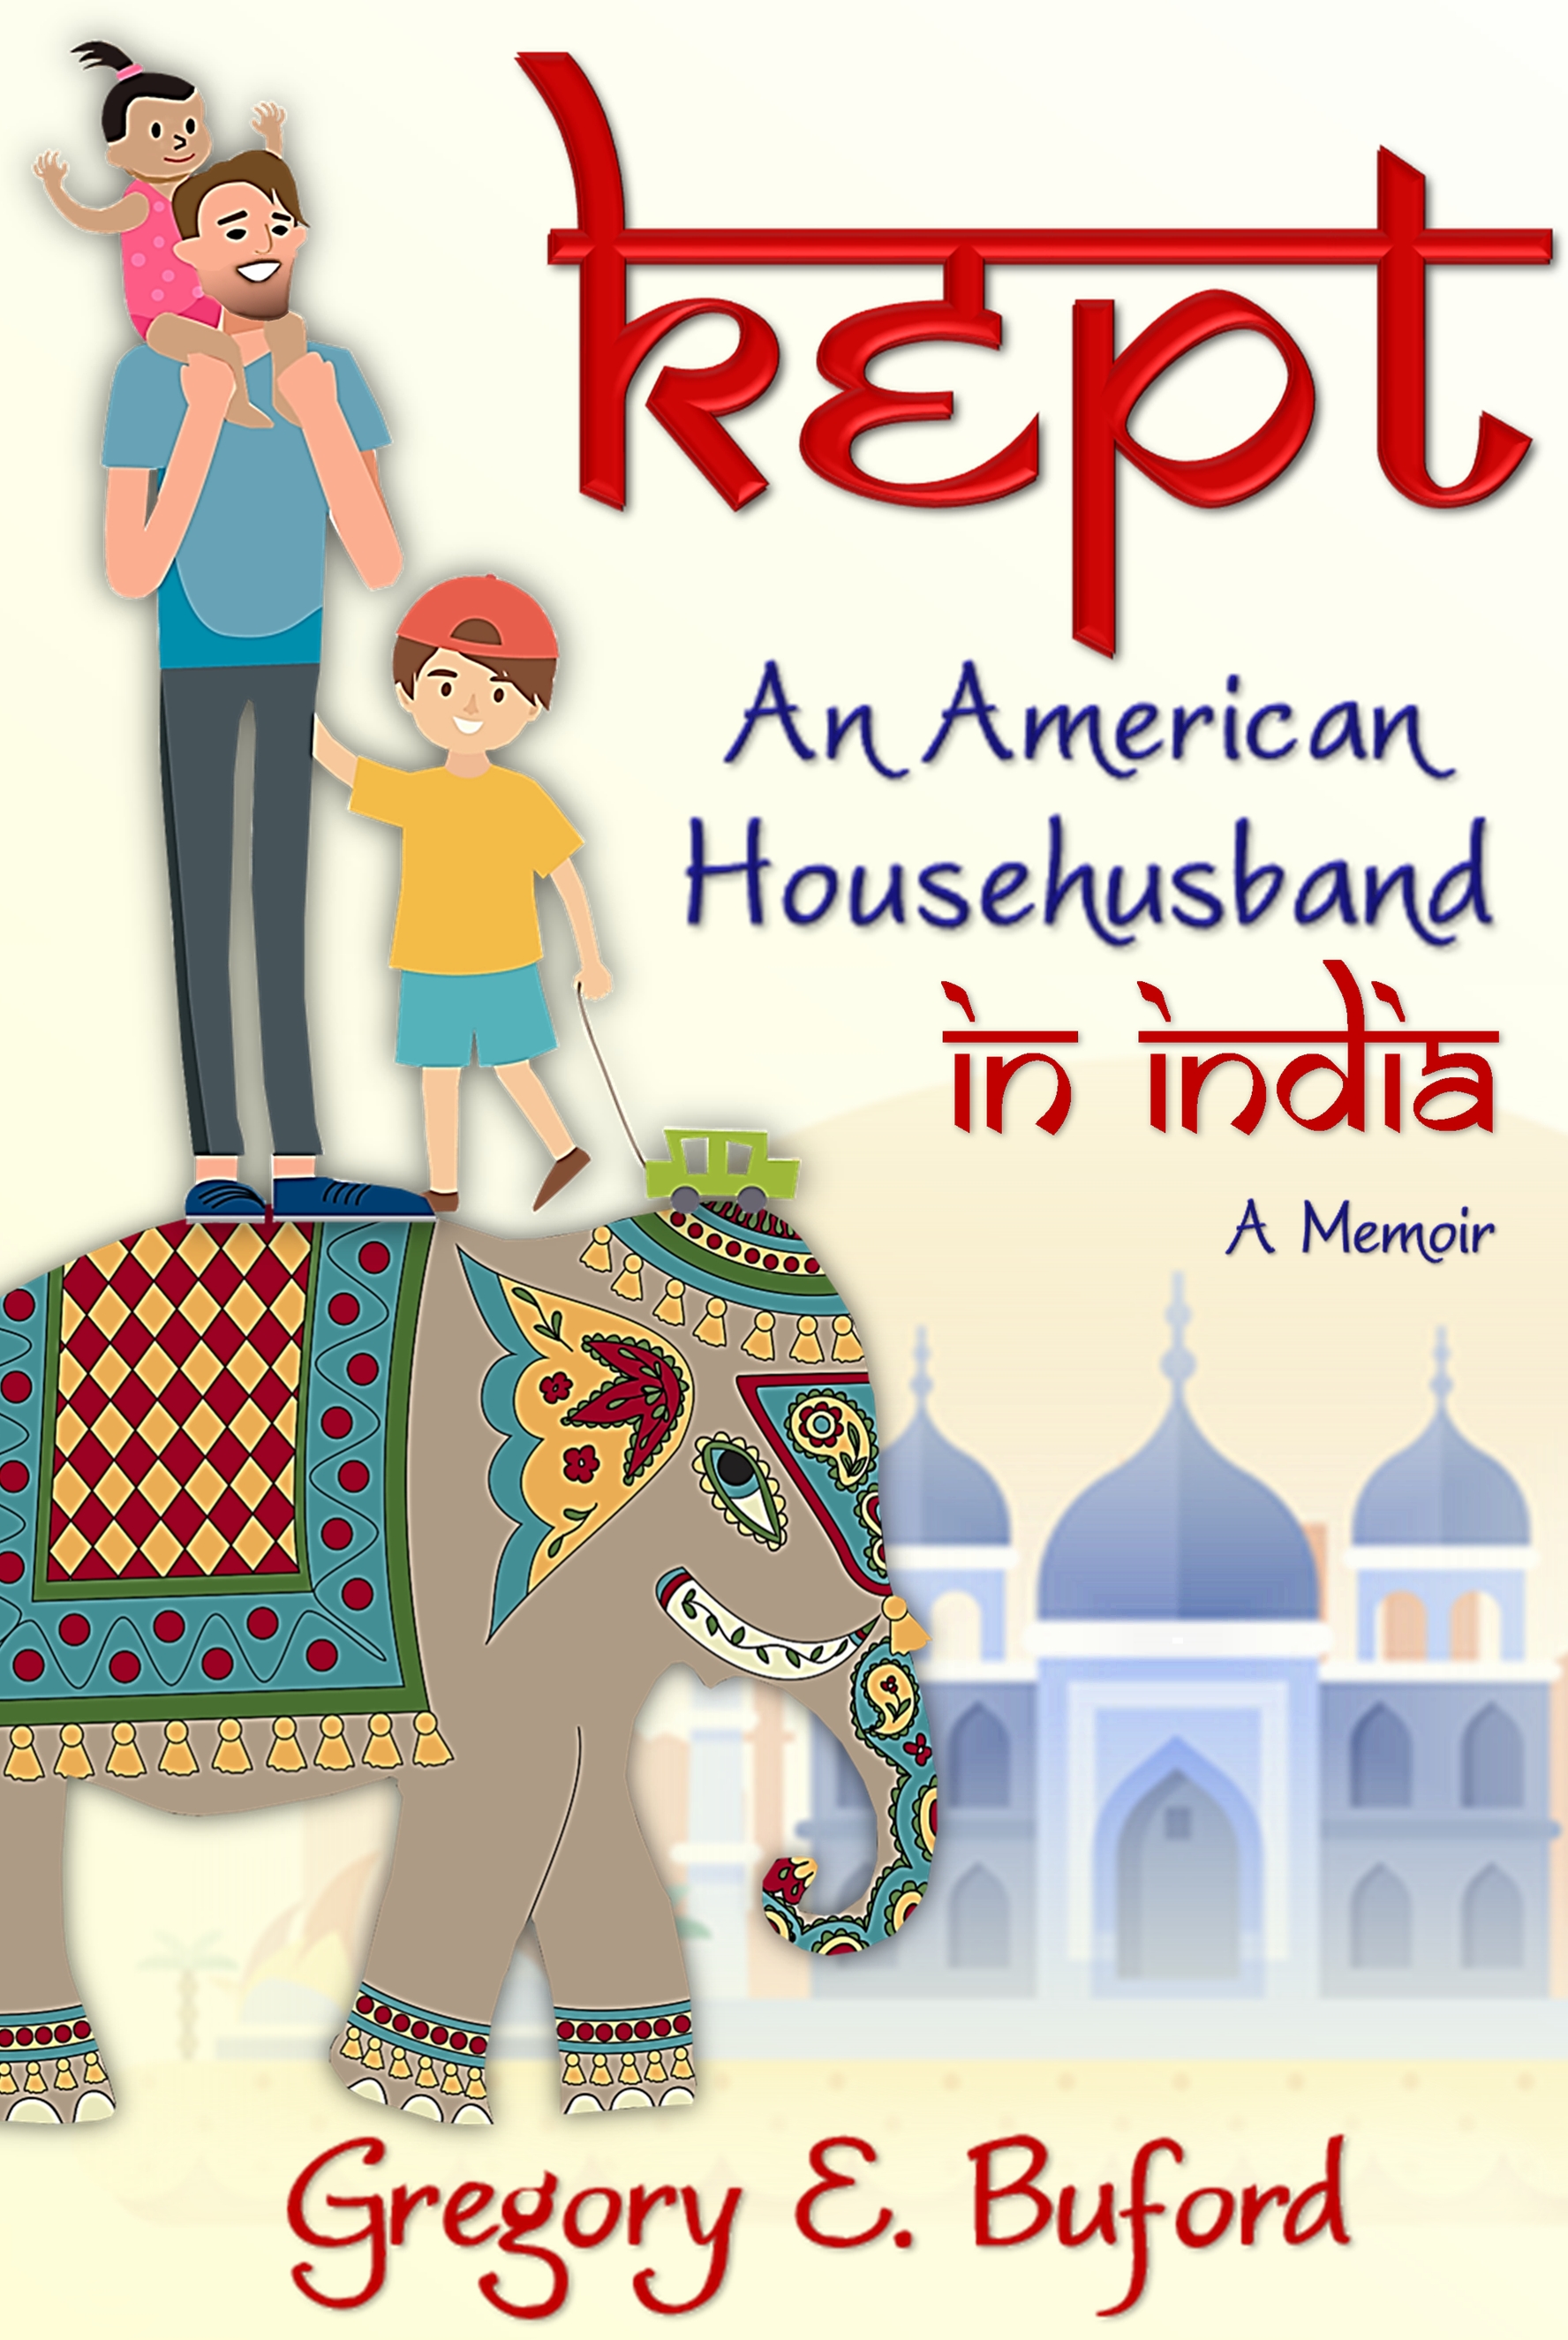 Book cover with elephant, Taj Mahal and man with kids.